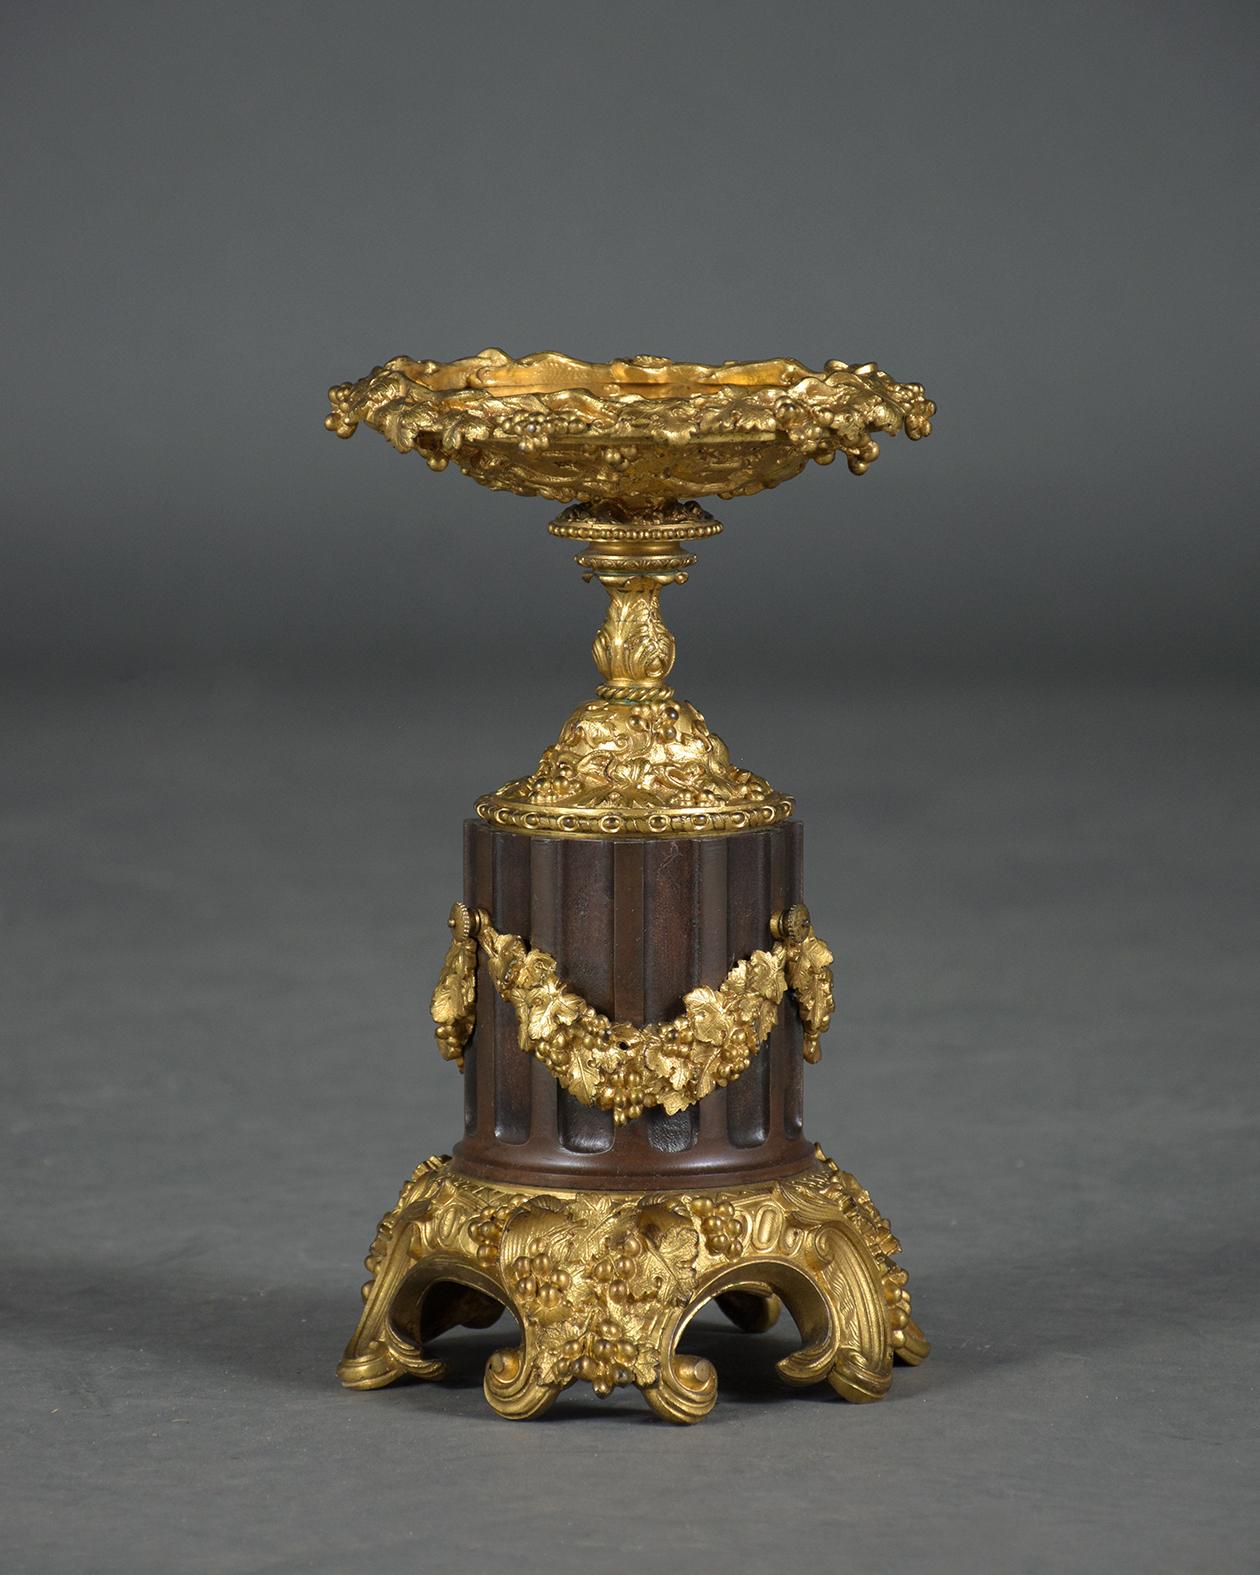 Early 19th-Century French Bronzed Urns with Gold-Plated Garland Decoration For Sale 2